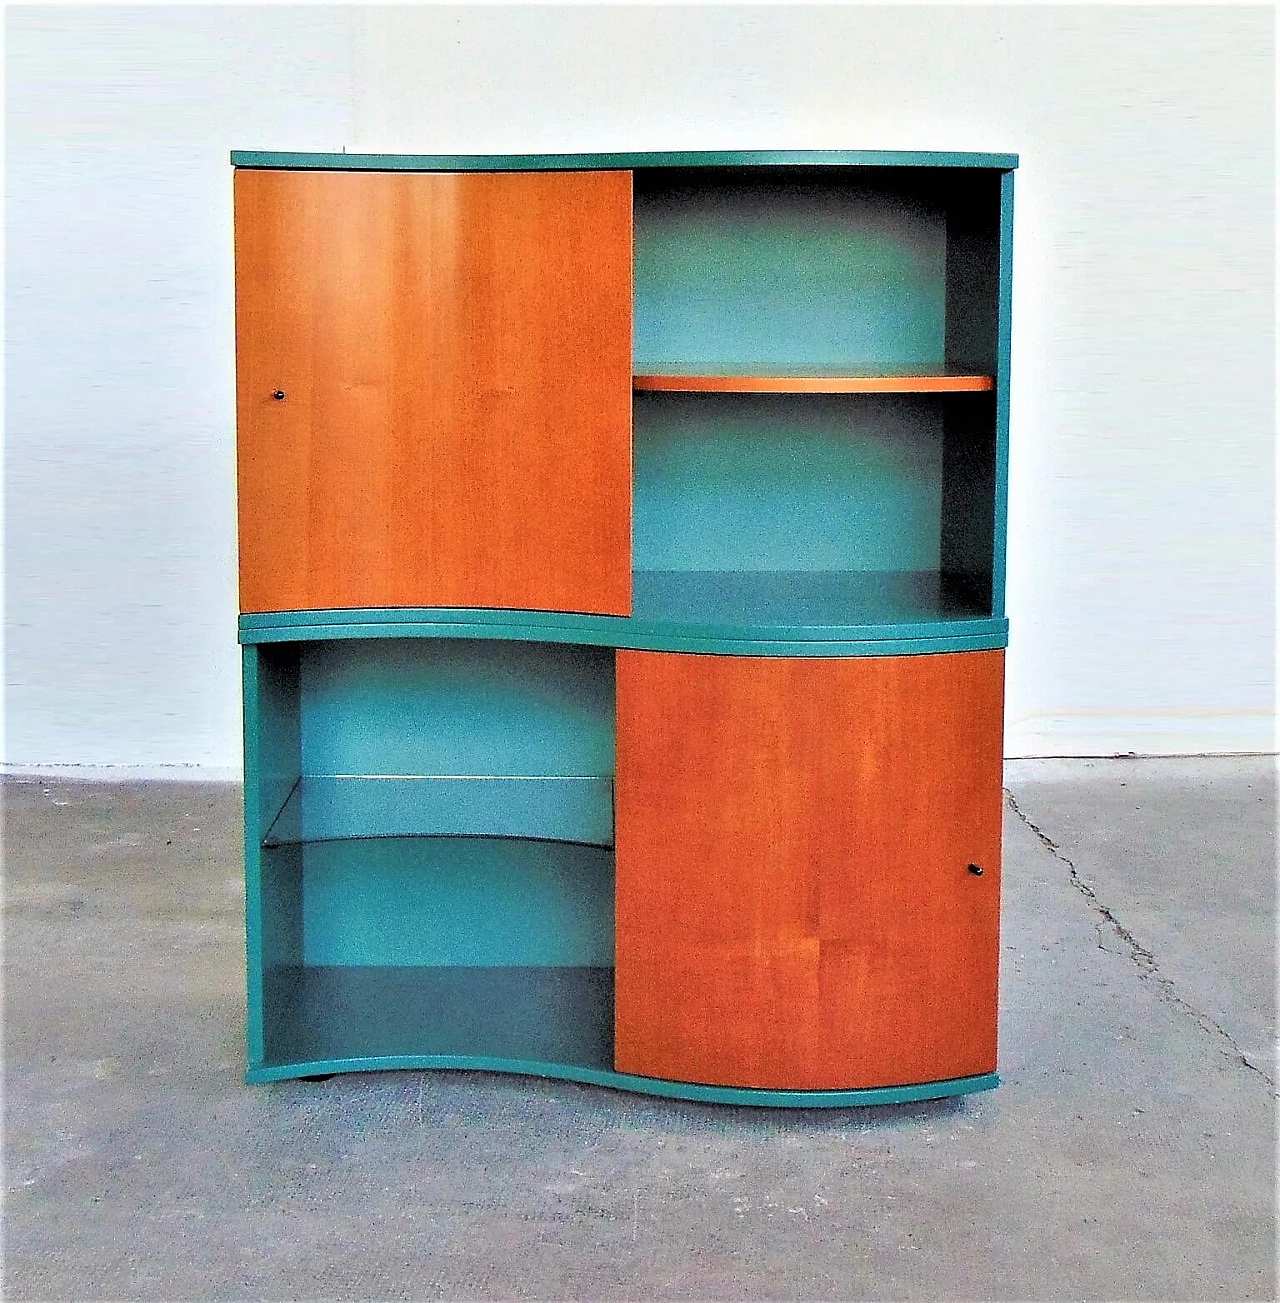 Sideboard Green Satin Lacquer, Doors in Walnut-Stained Cherry, for Roche Bobois, 1990s 1167288